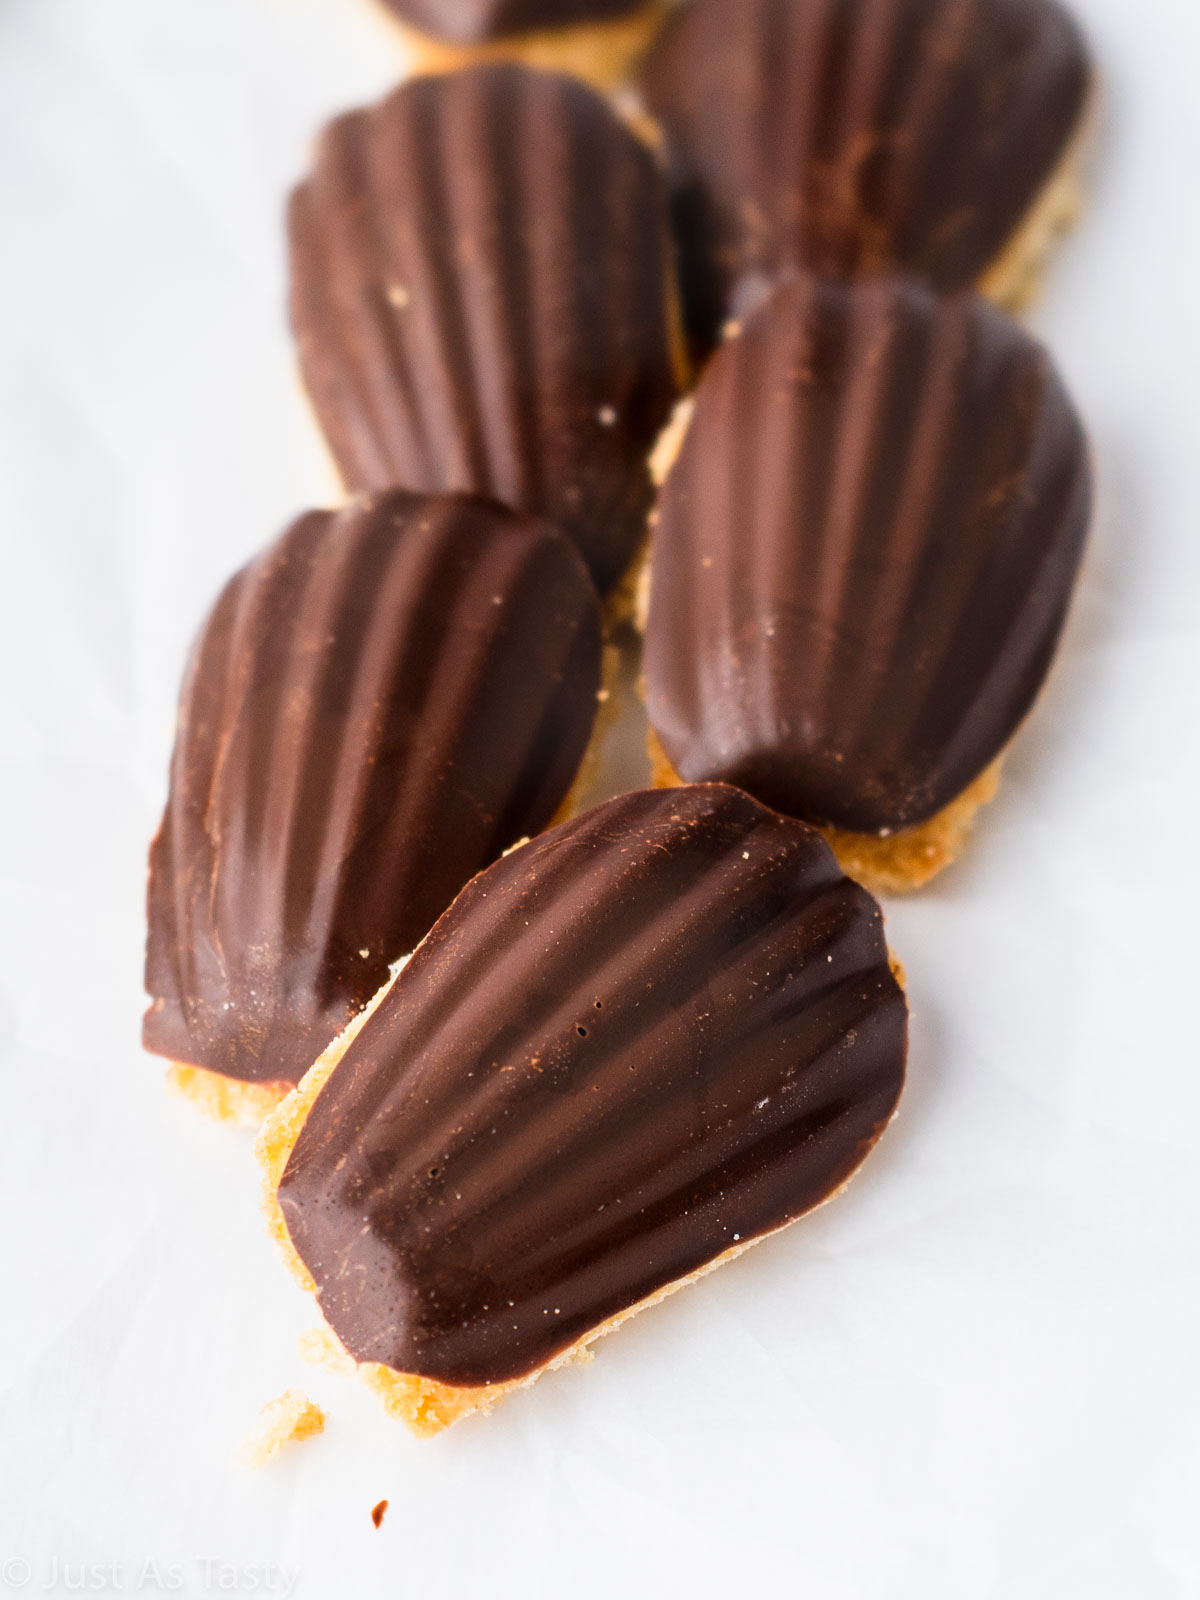 Chocolate dipped madeleines on a white surface.